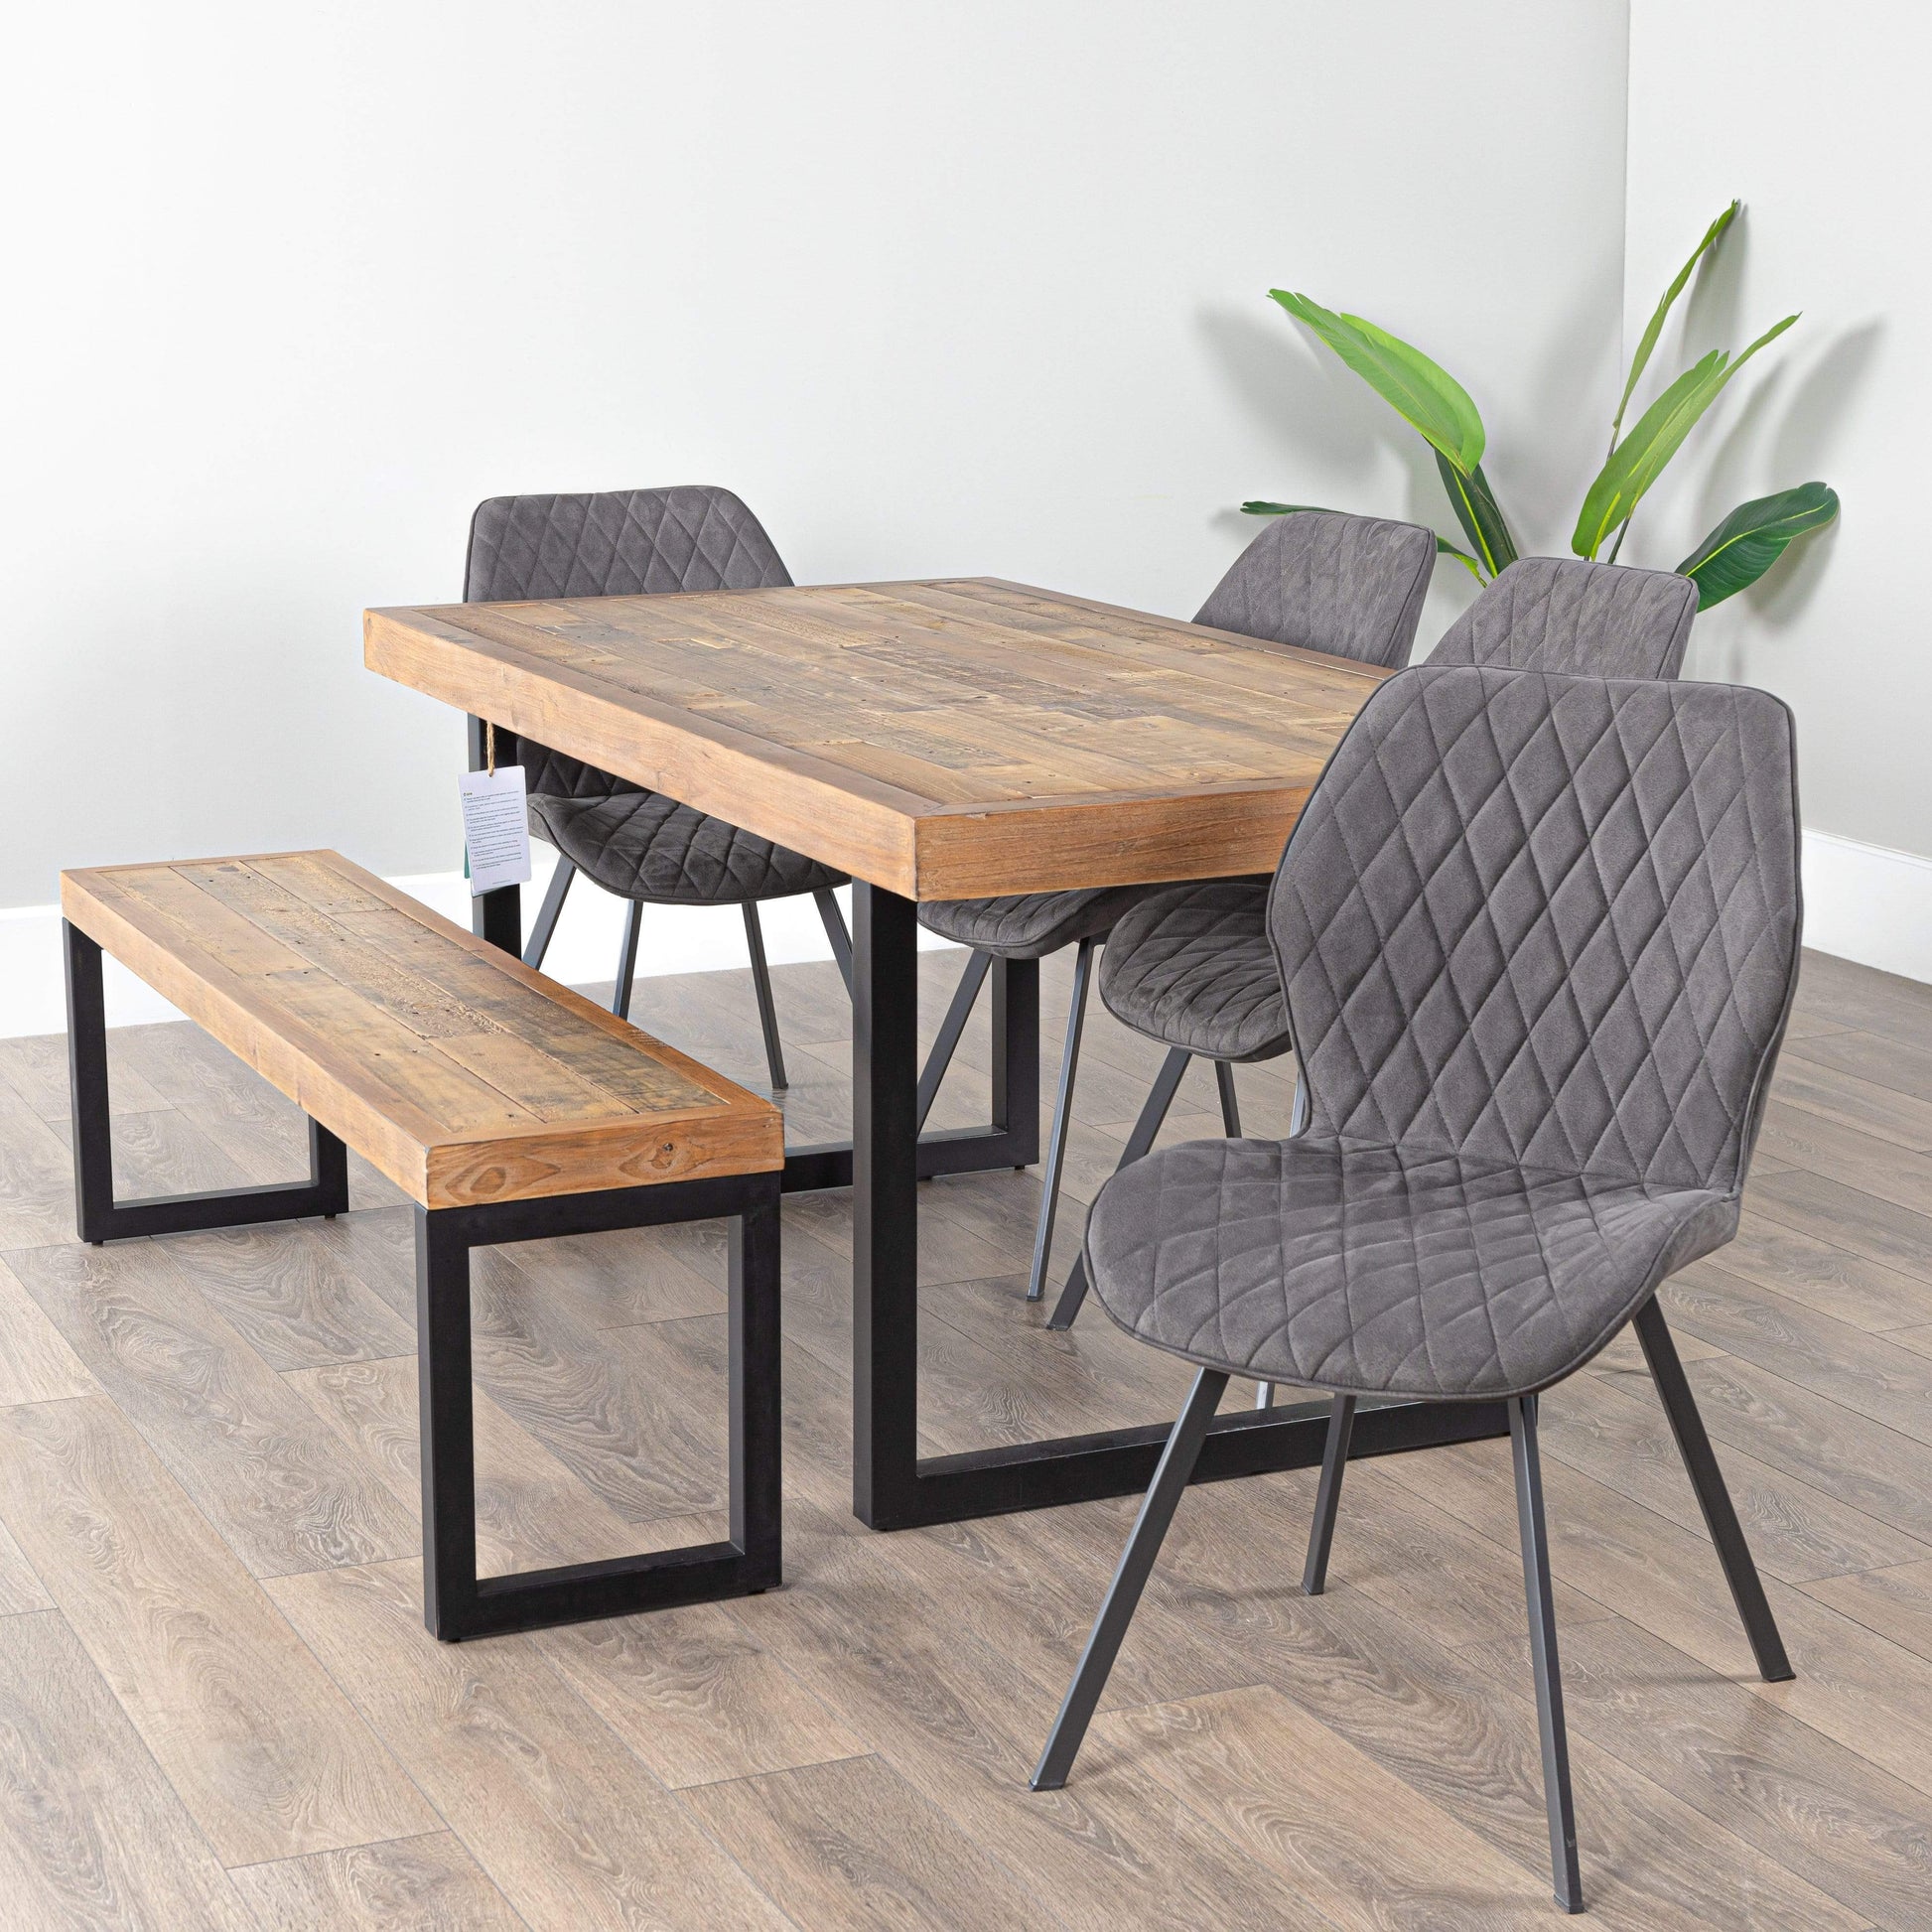 Furniture  -  Lincoln Fixed Top Dining Set With Bench & 4 Grey Toronto Chairs  -  50153040